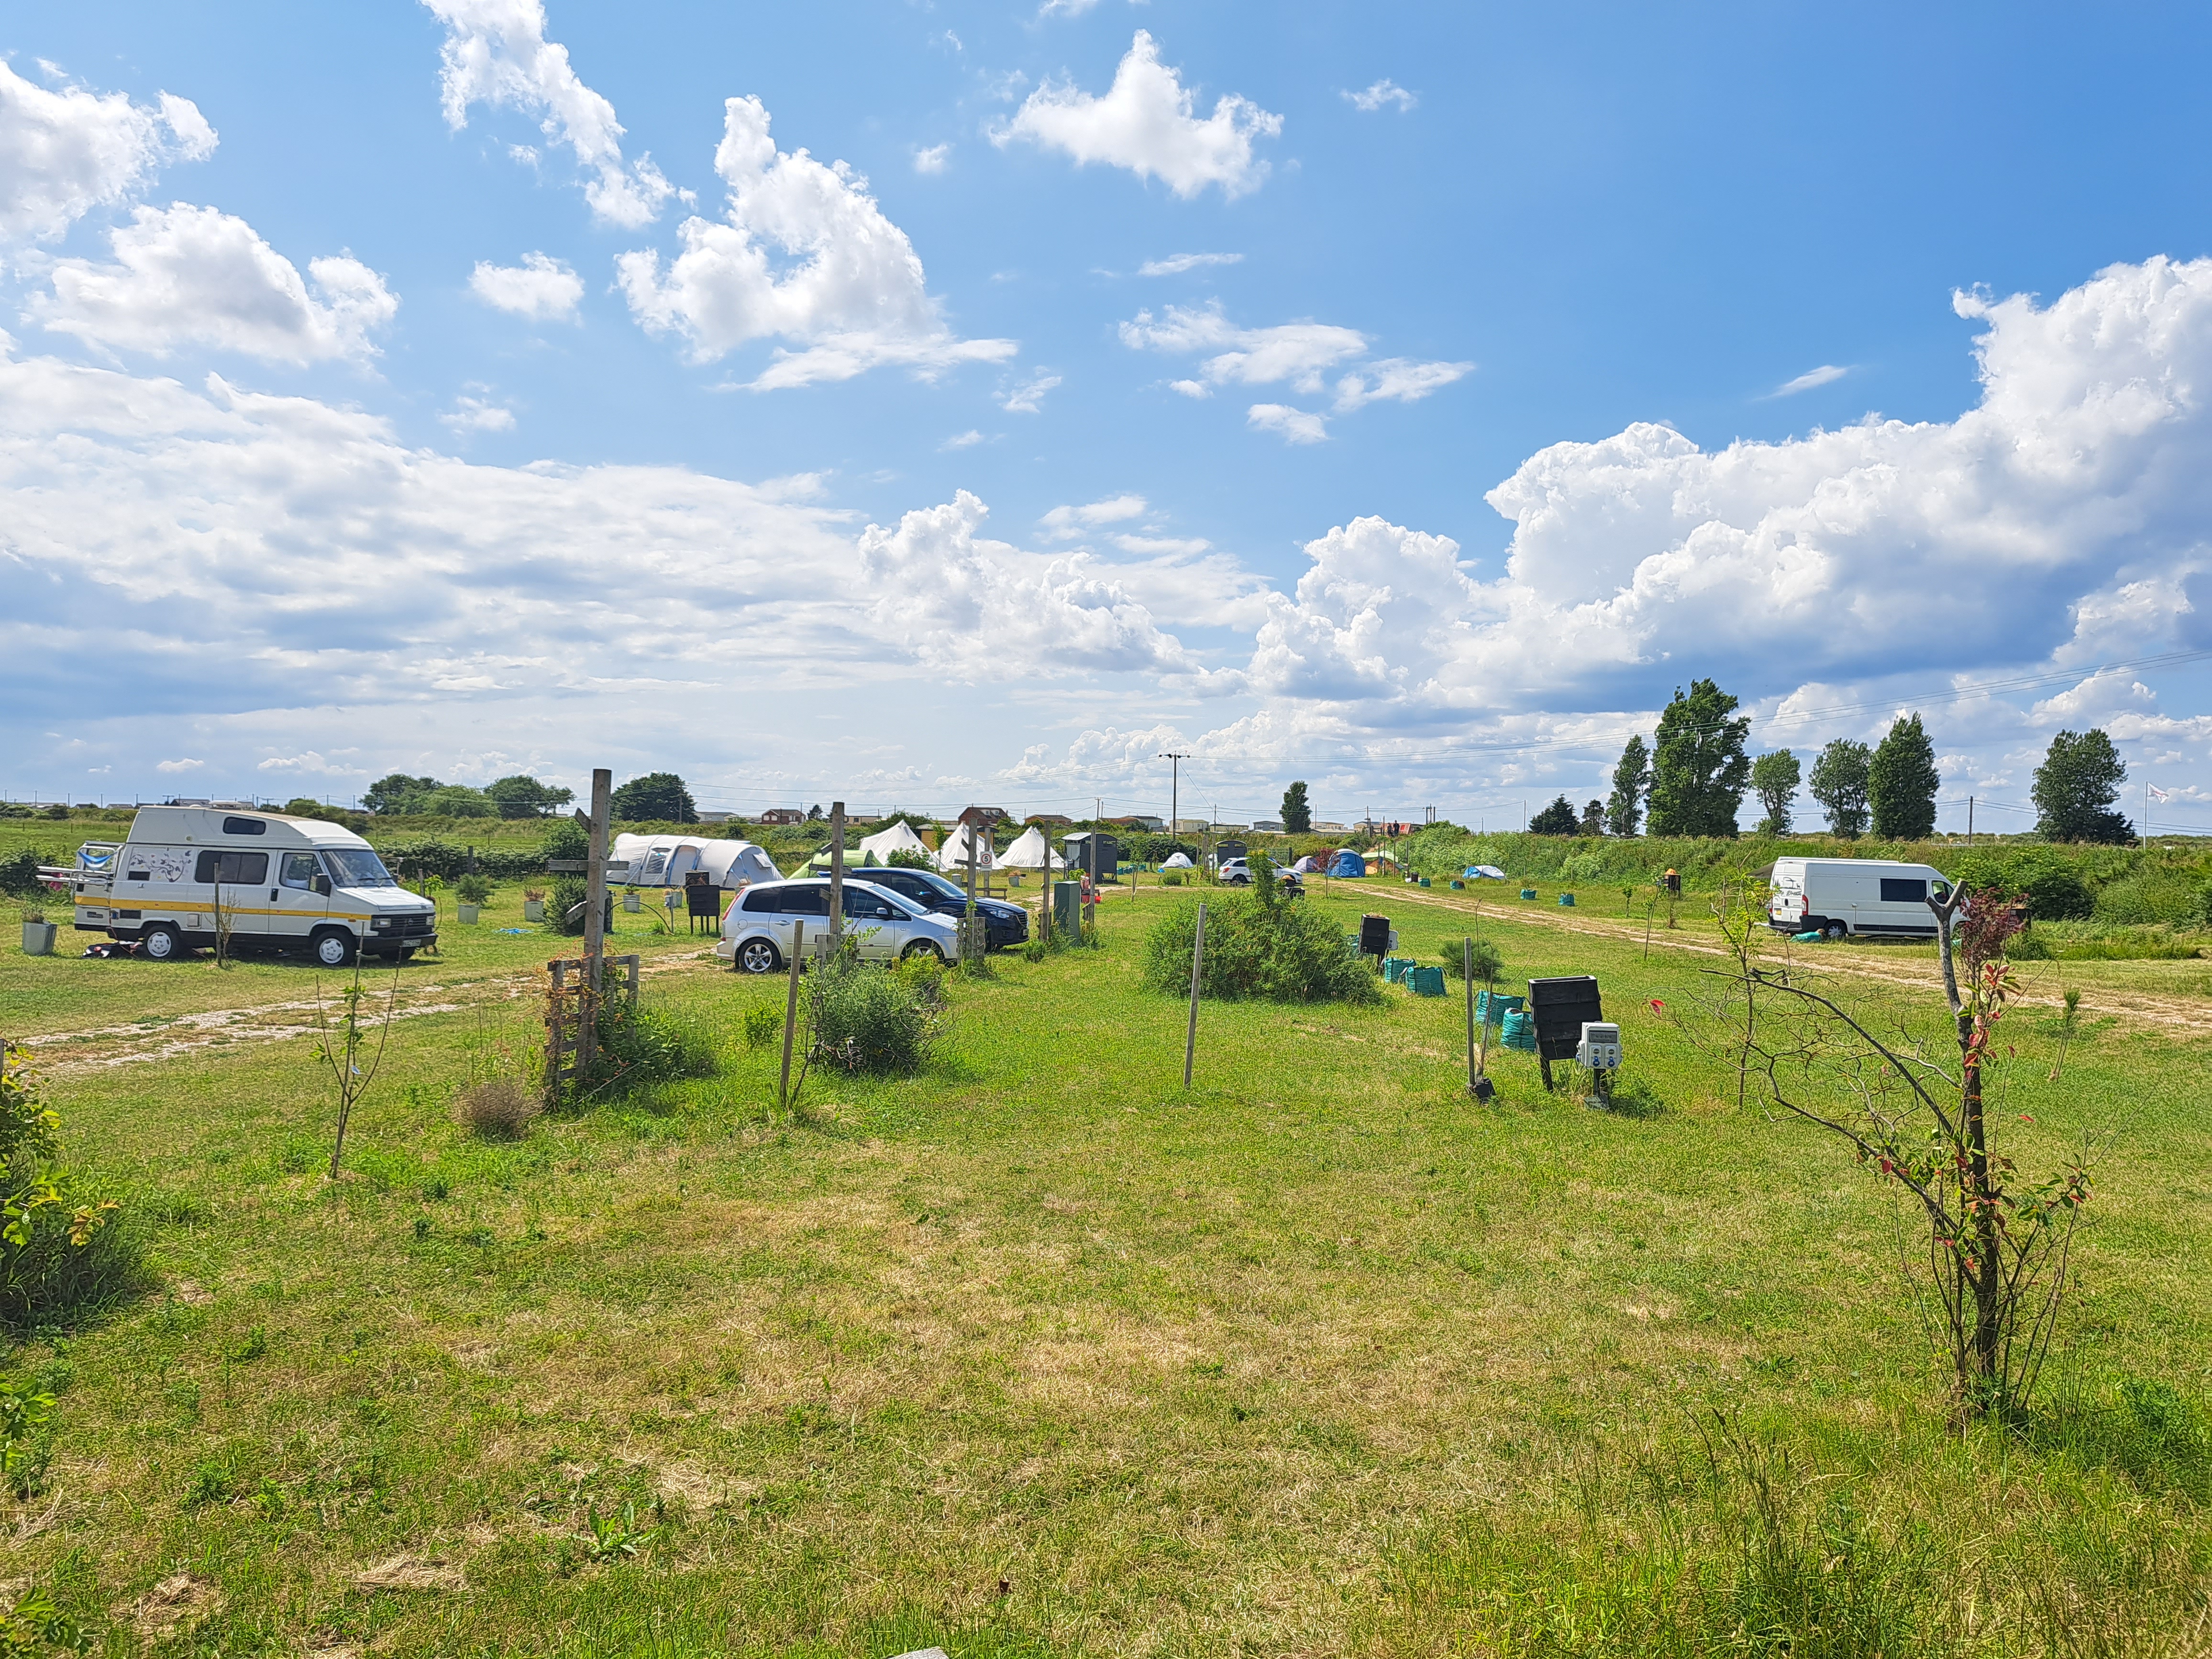 A sunny camping and caravan site